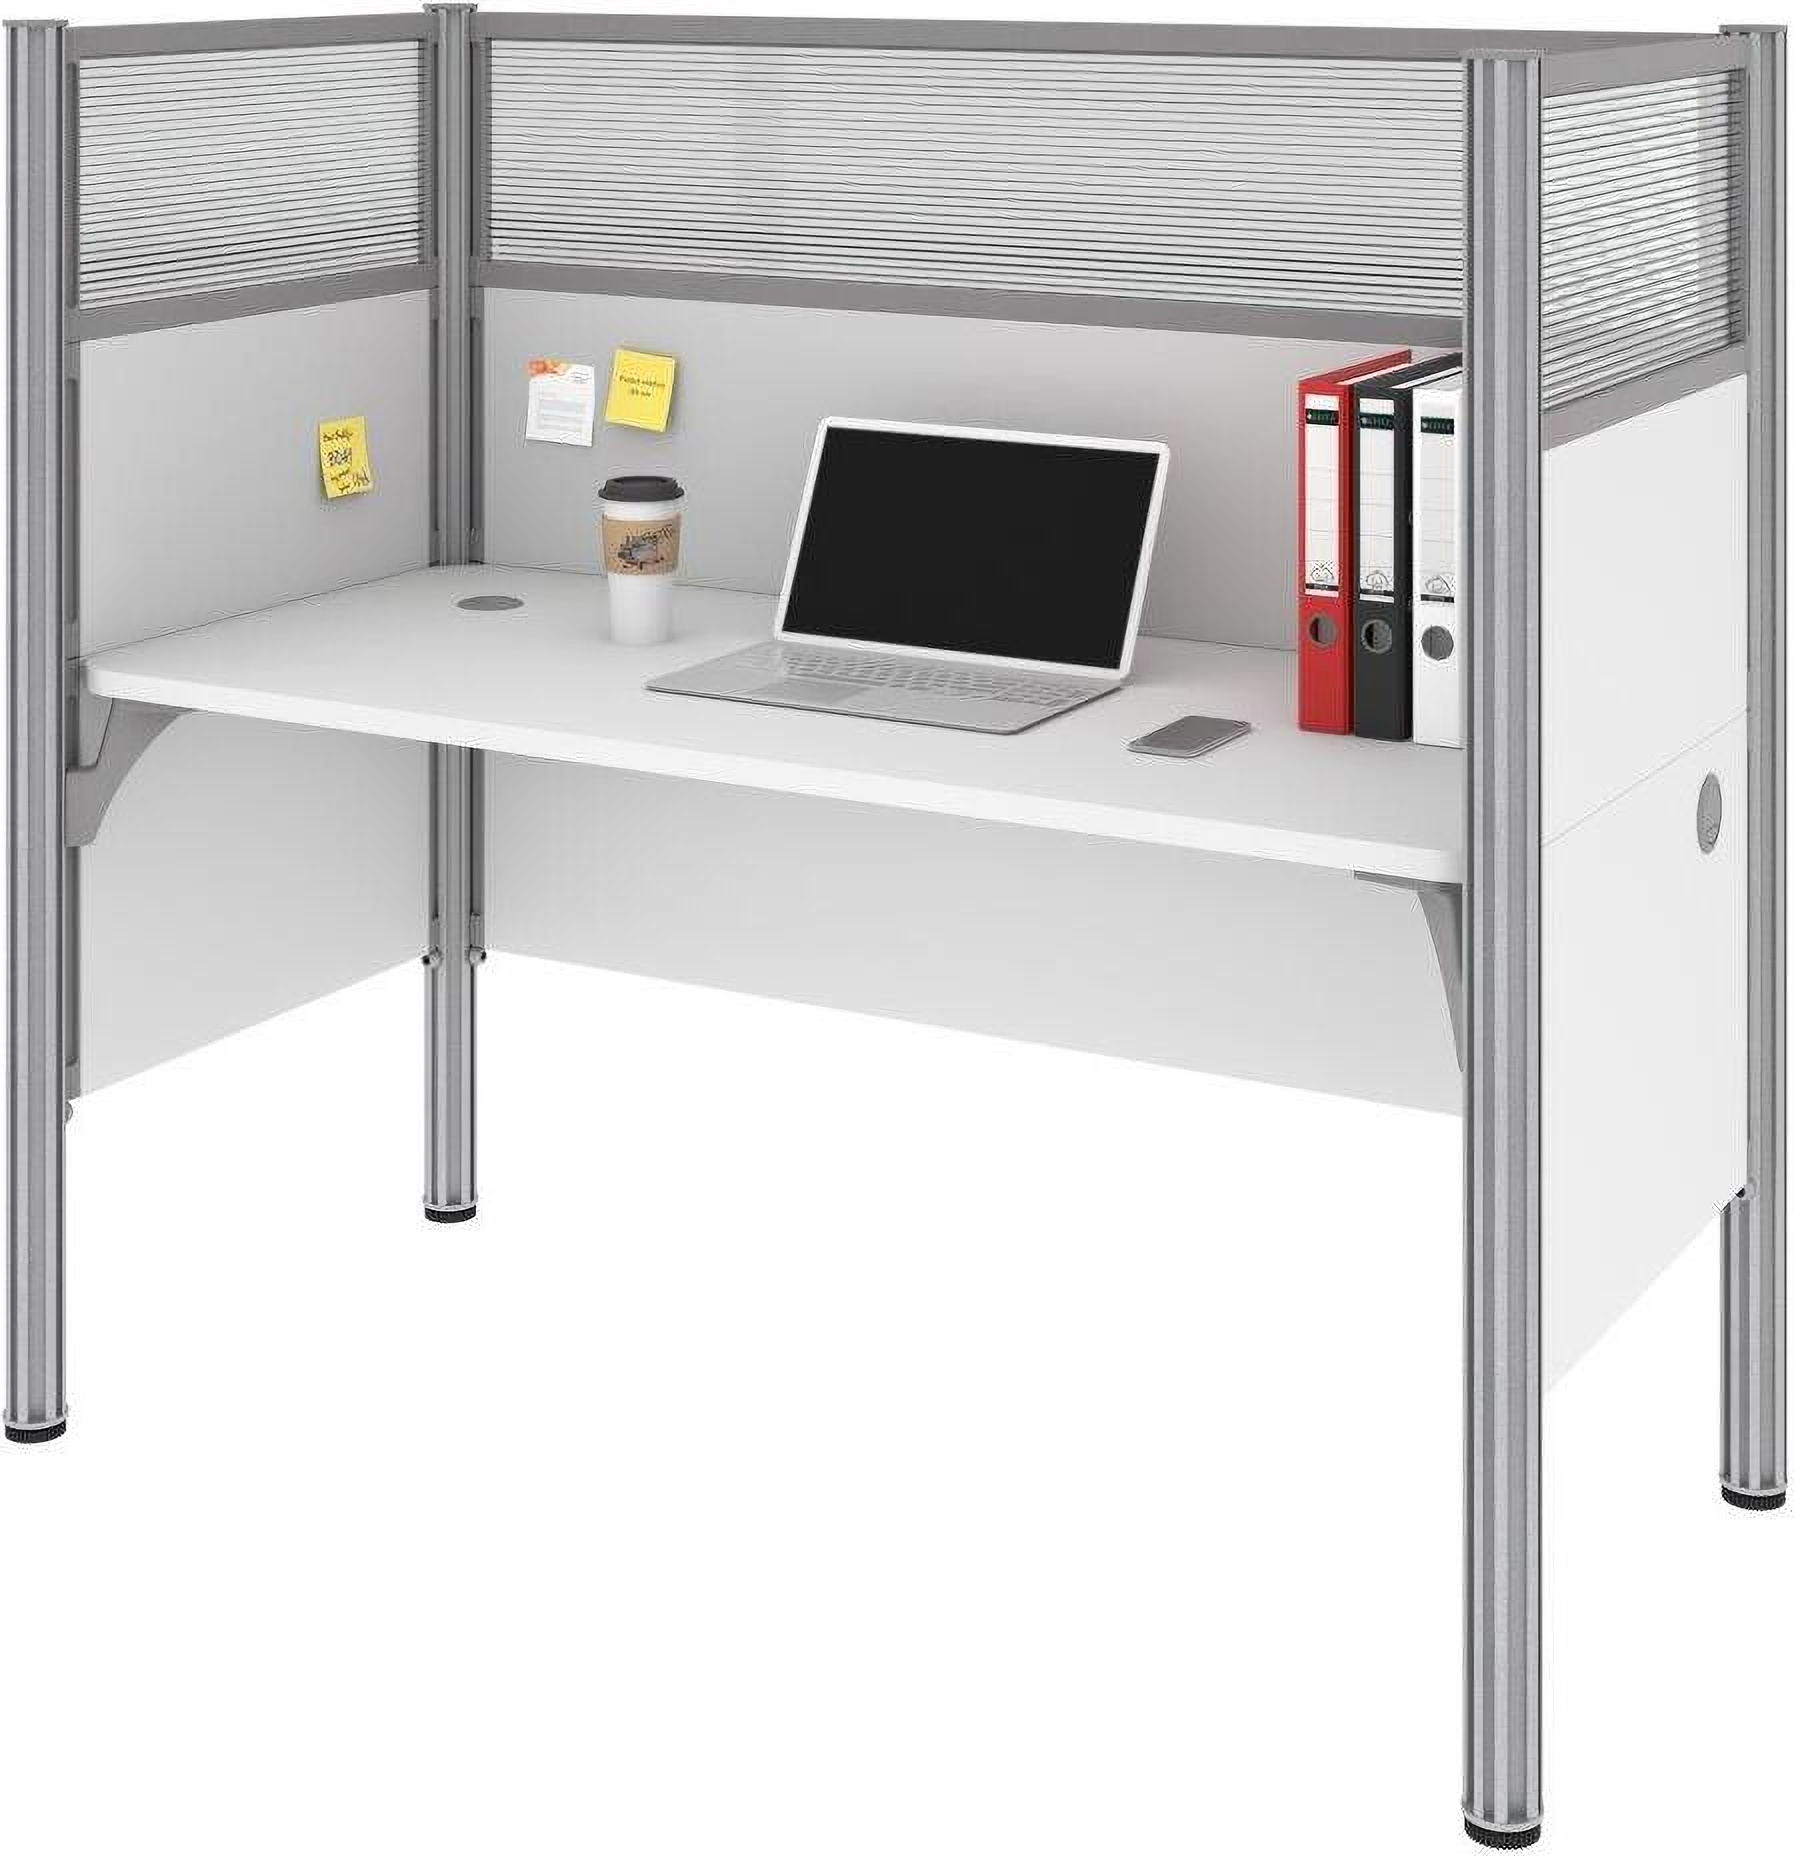 62.5 L-Shaped Desk with Storage by Monarch 